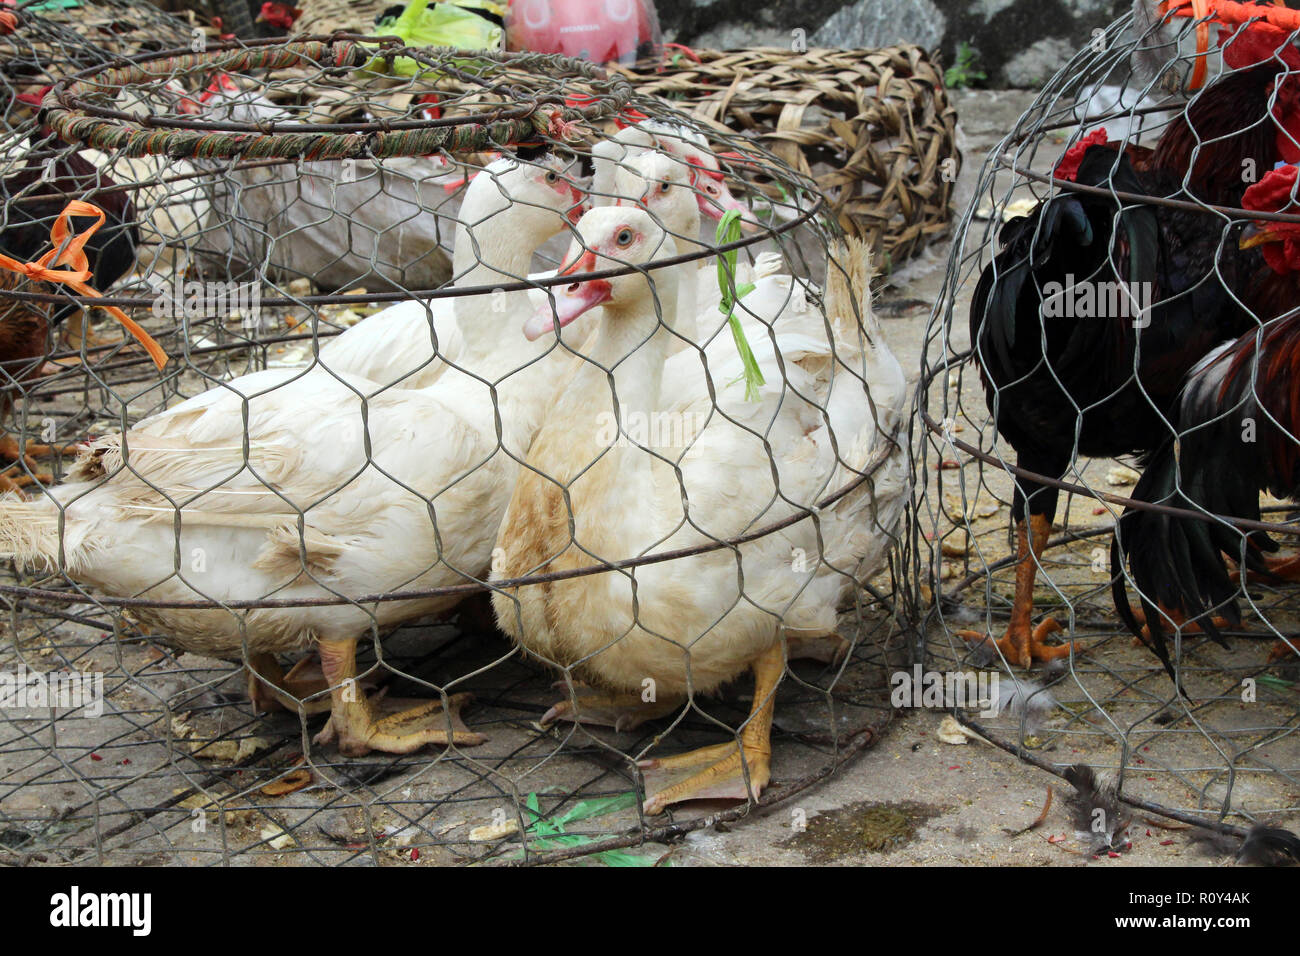 Caged ducks and roosters for sale at Bac Ha Market, Vietnam Stock Photo